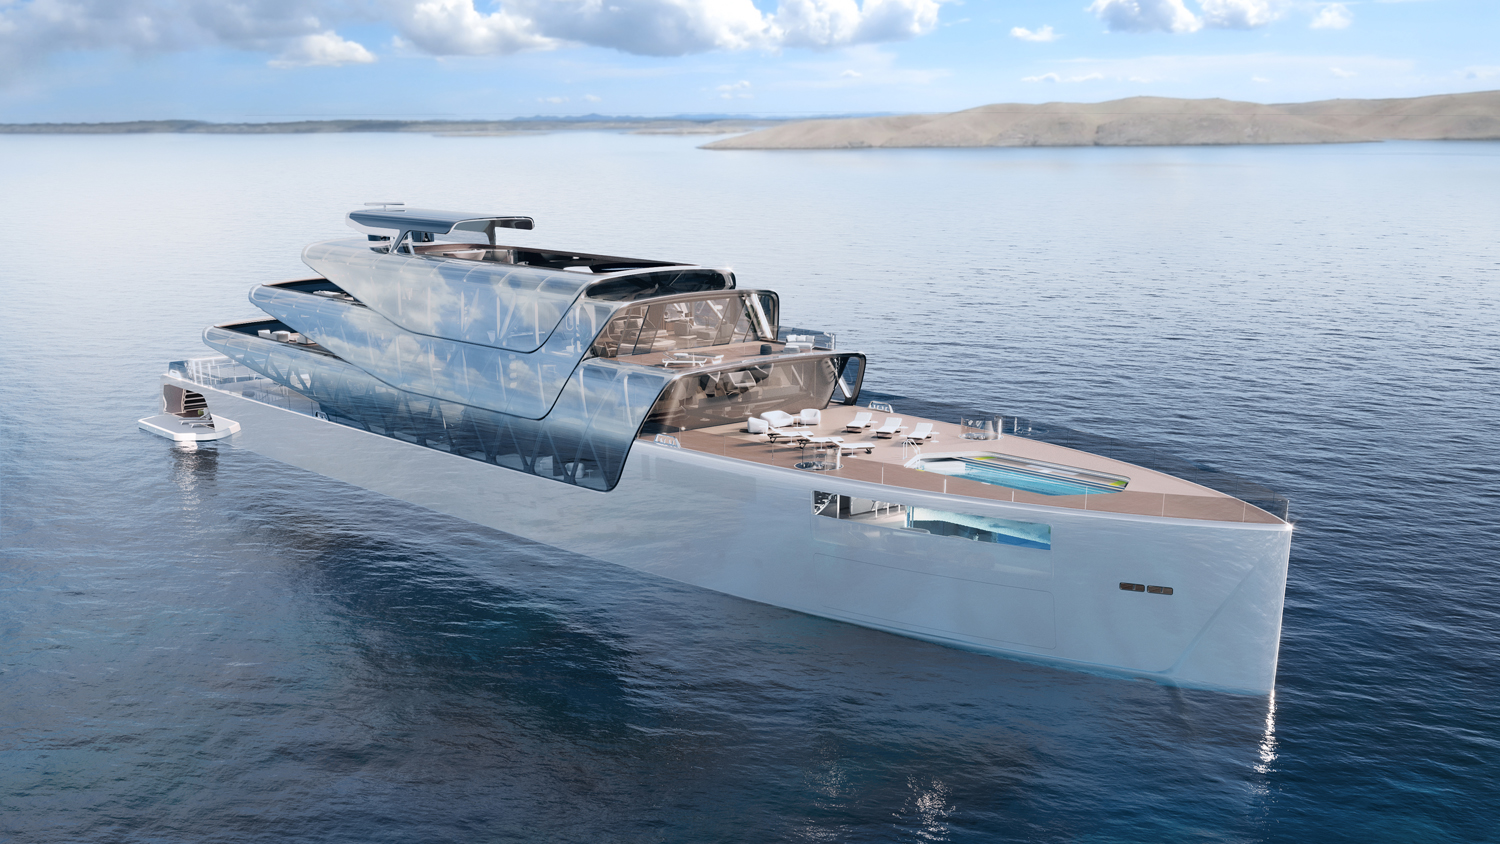 The Pegasus superyacht concept is designed to be fully 3D-printed, with a mirrored exterior that reflects the surrounding landscape - Effect Magazine